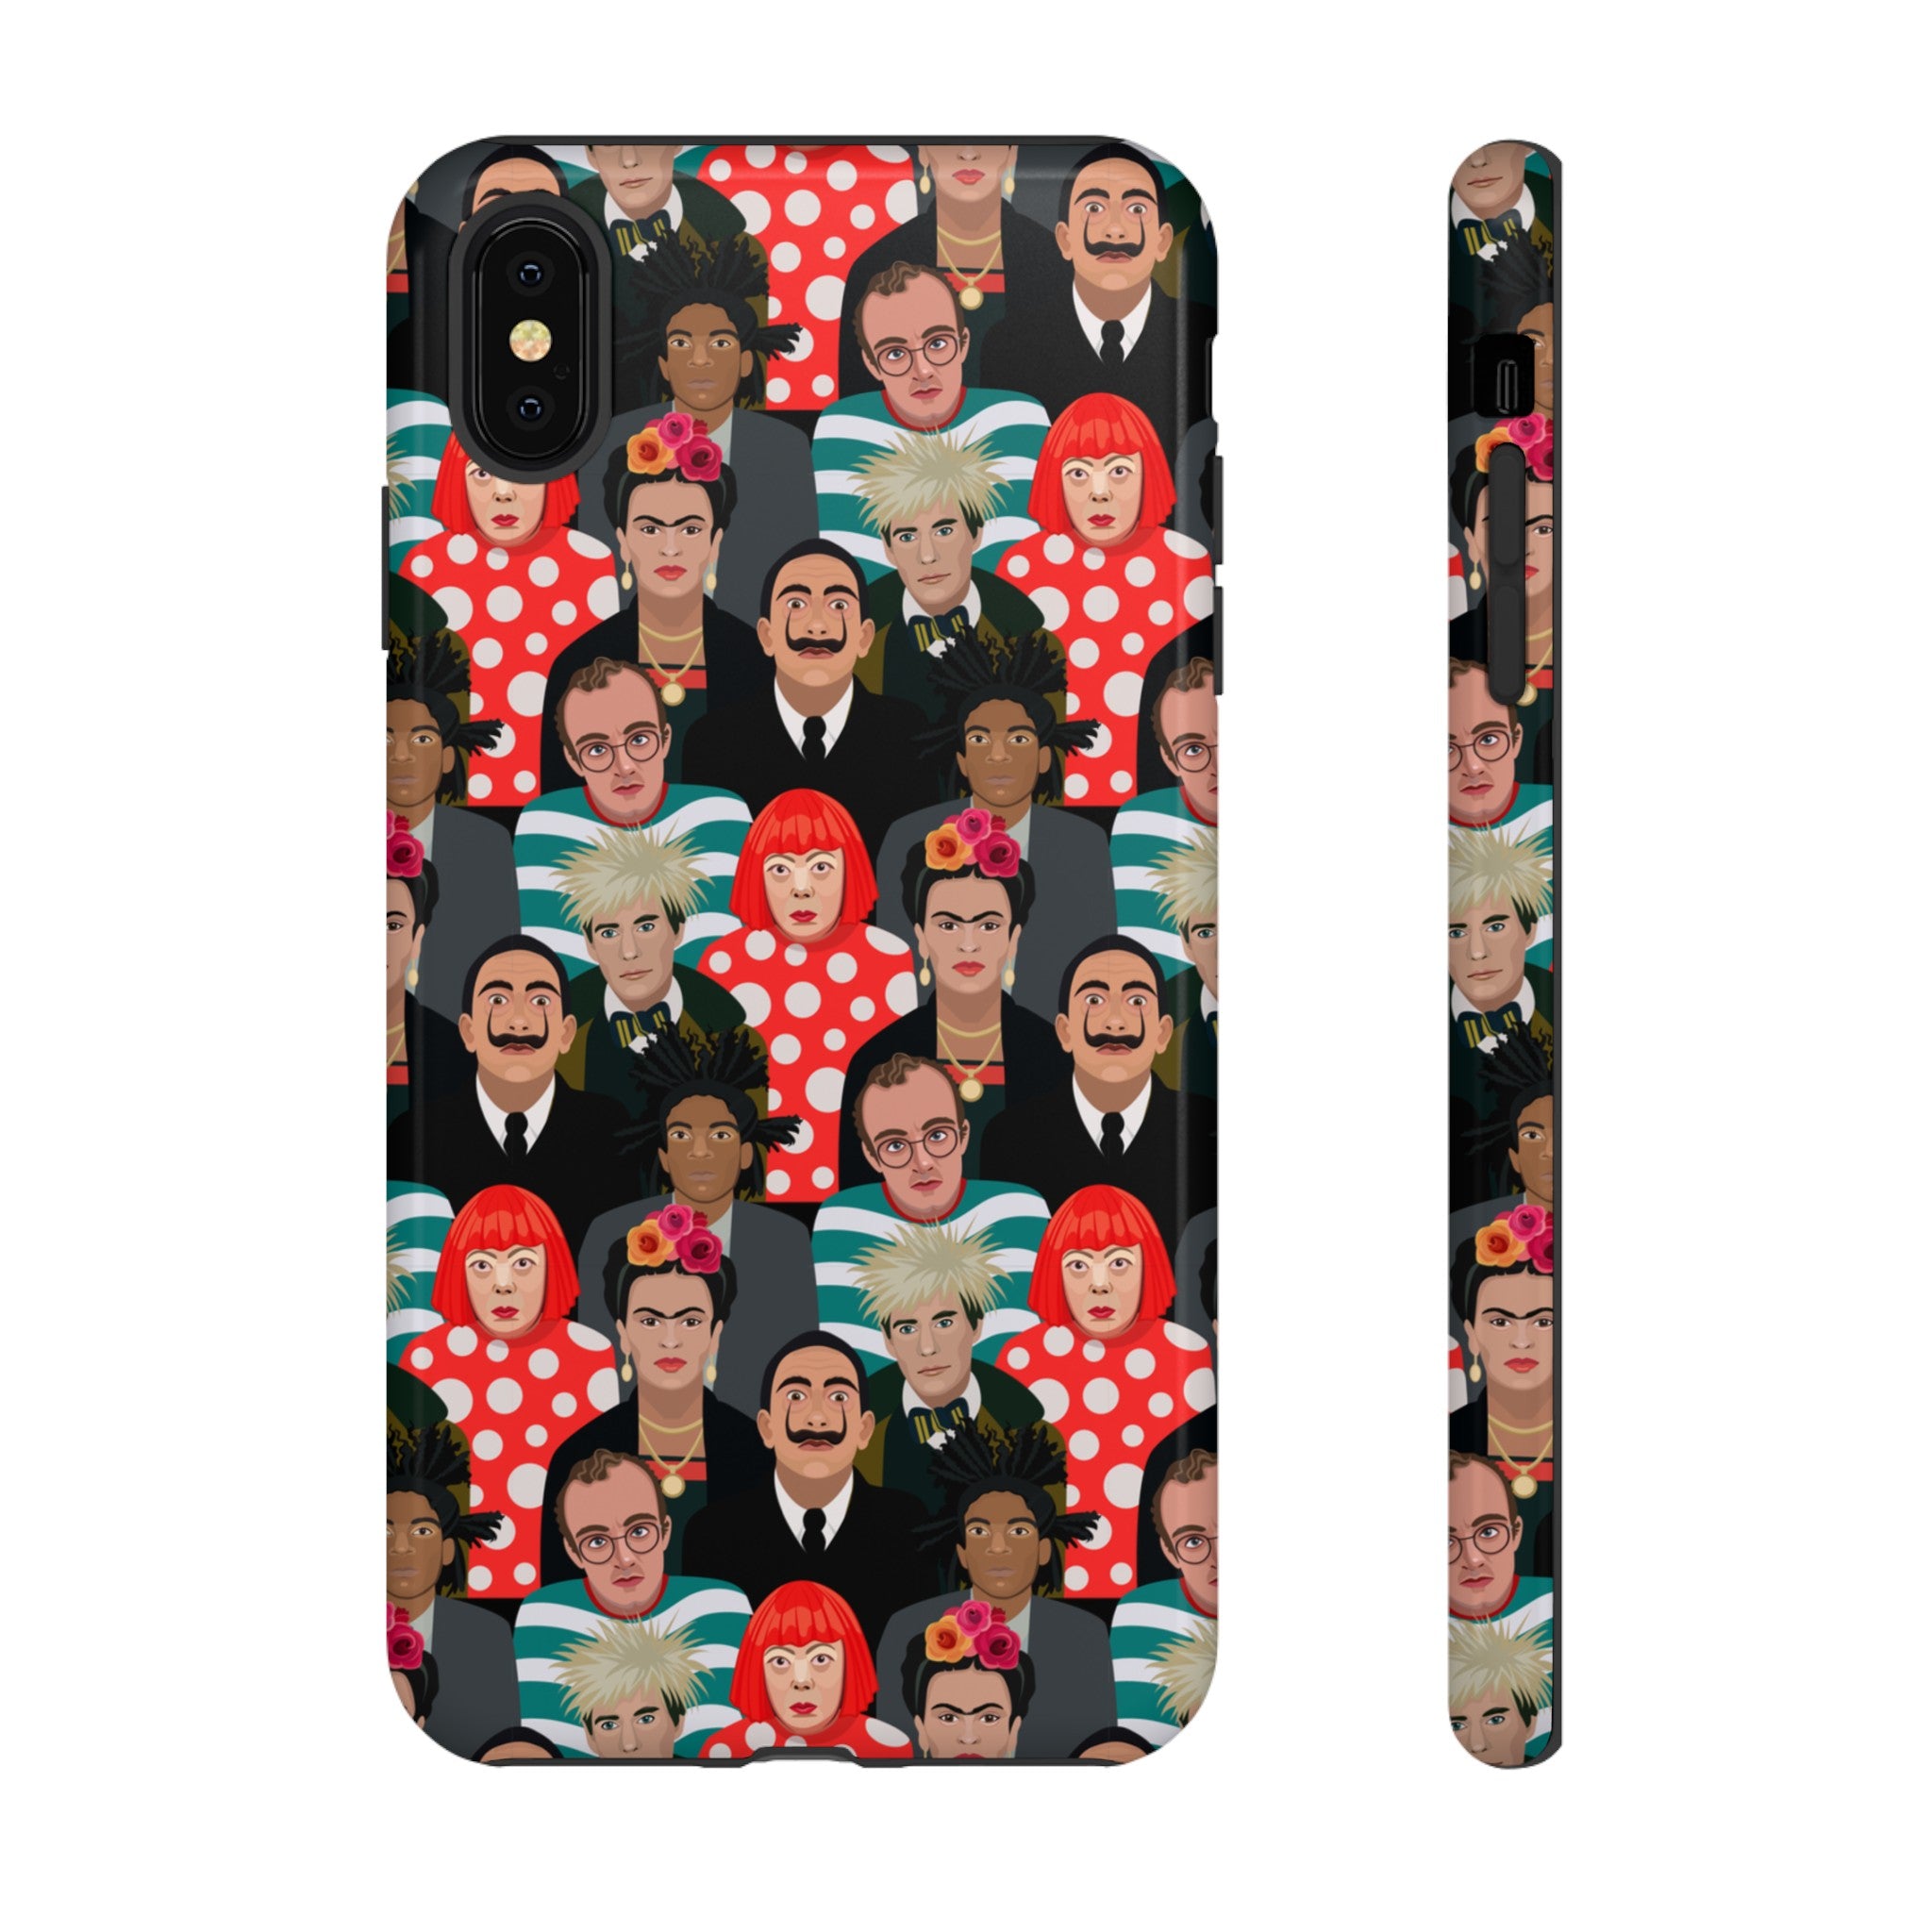 Stylish phone case with a colorful collage of iconic artists including Frida Kahlo, Warhol, Dali, and Keith Haring. Vibrant pop art design features stylized portraits on a dark background, perfect for art lovers.